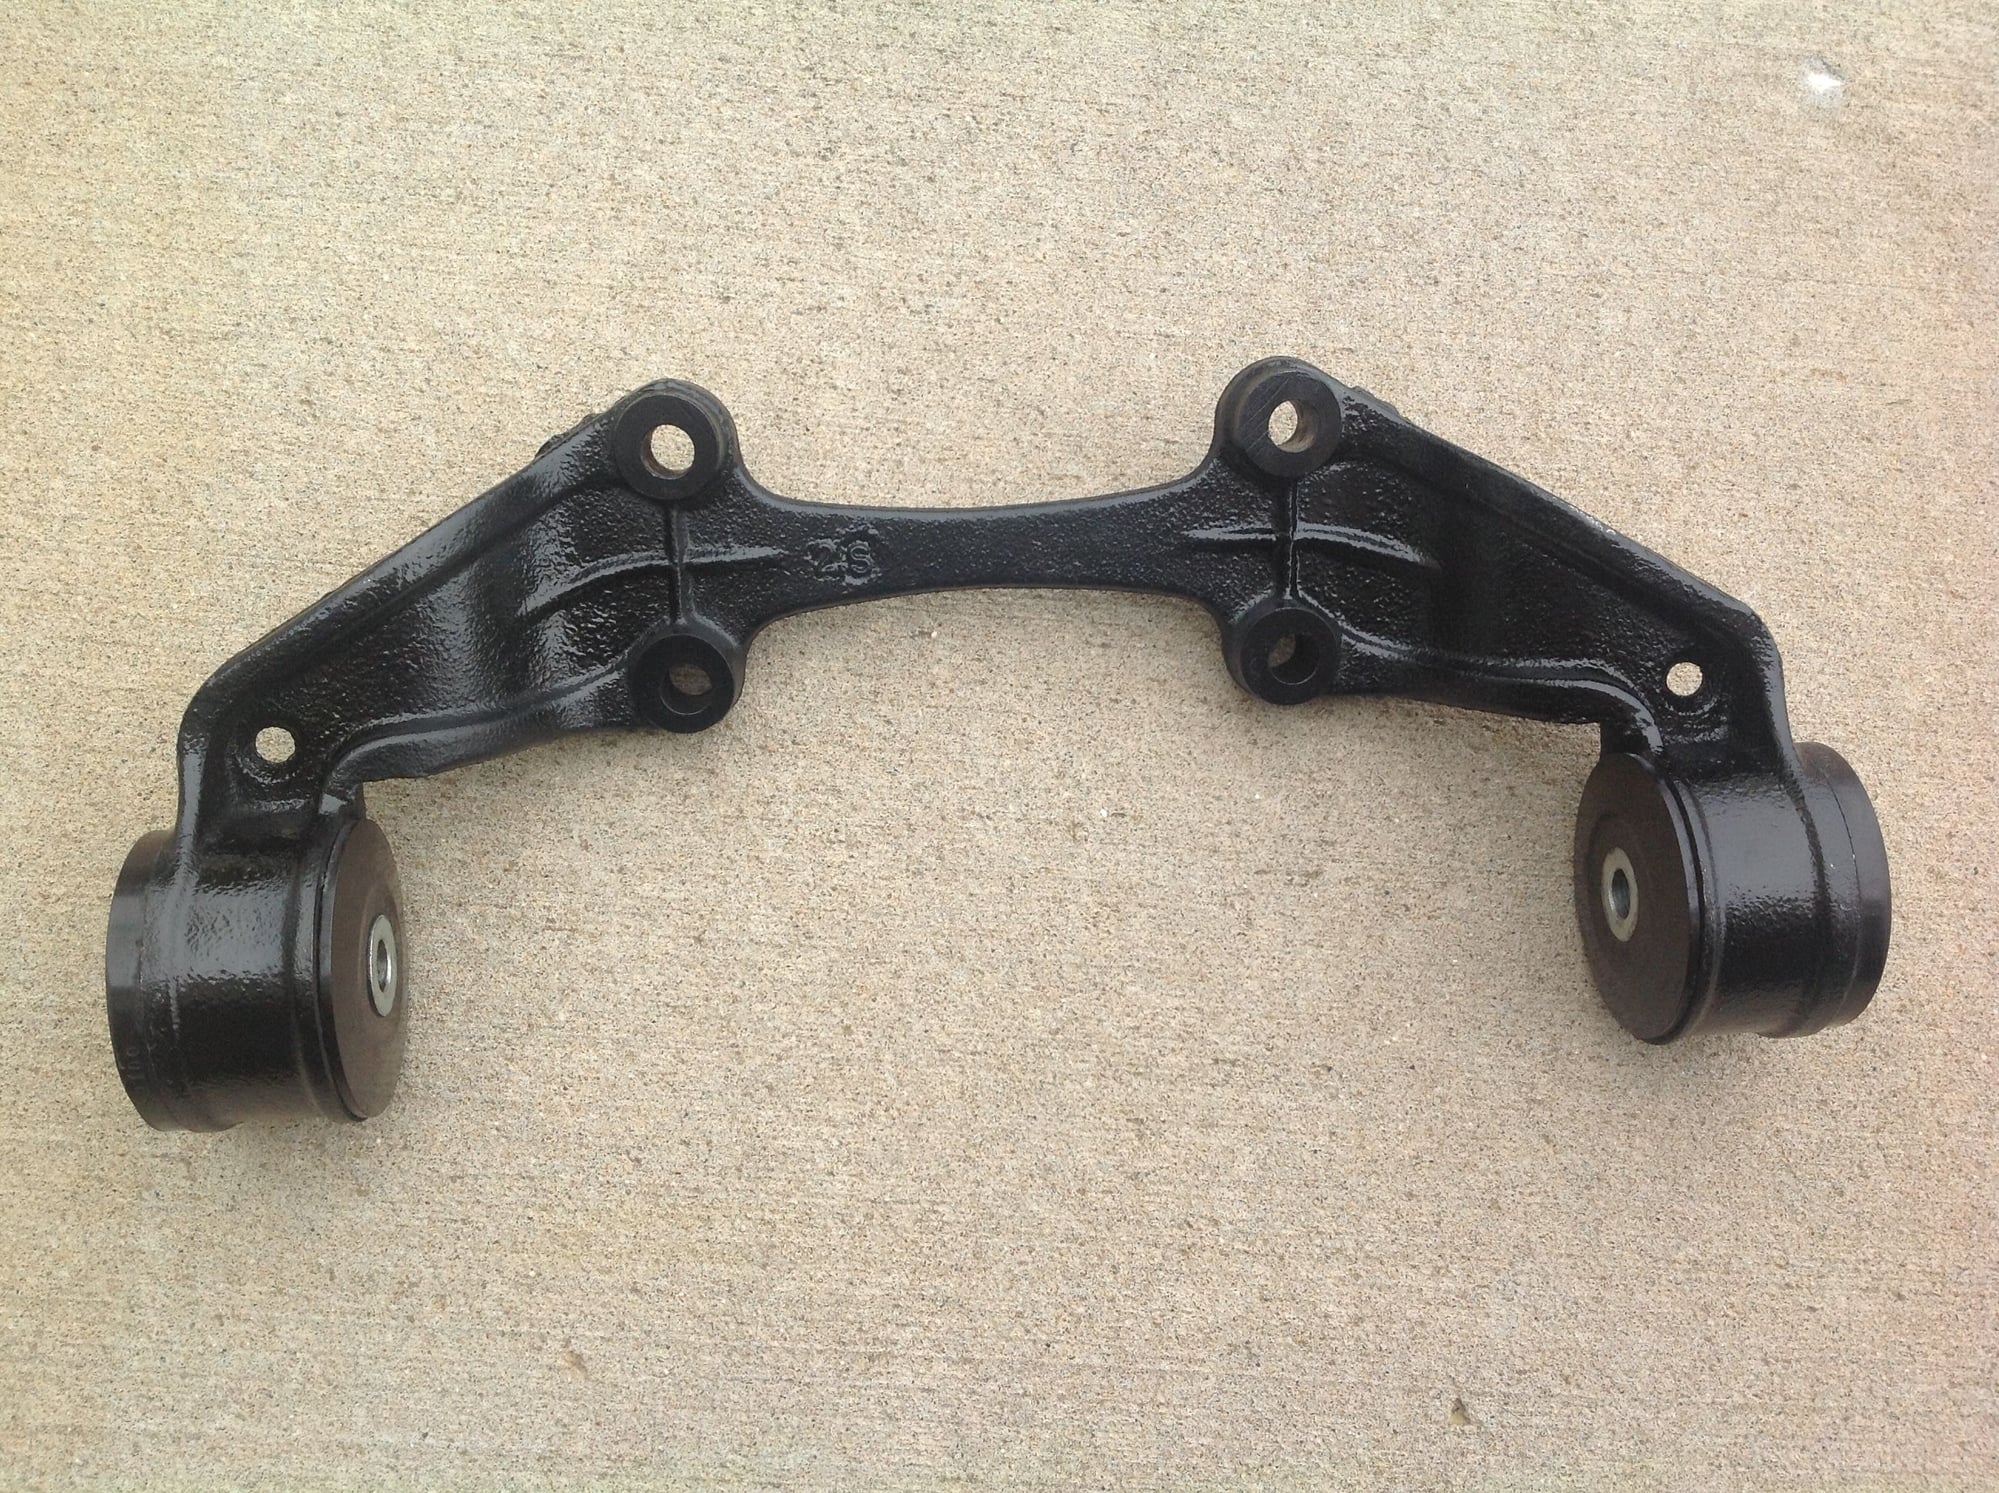 Drivetrain - FD differential mount/hanger with SuperPro bushings - Used - 1993 to 1995 Mazda RX-7 - Florissant, MO 63031, United States